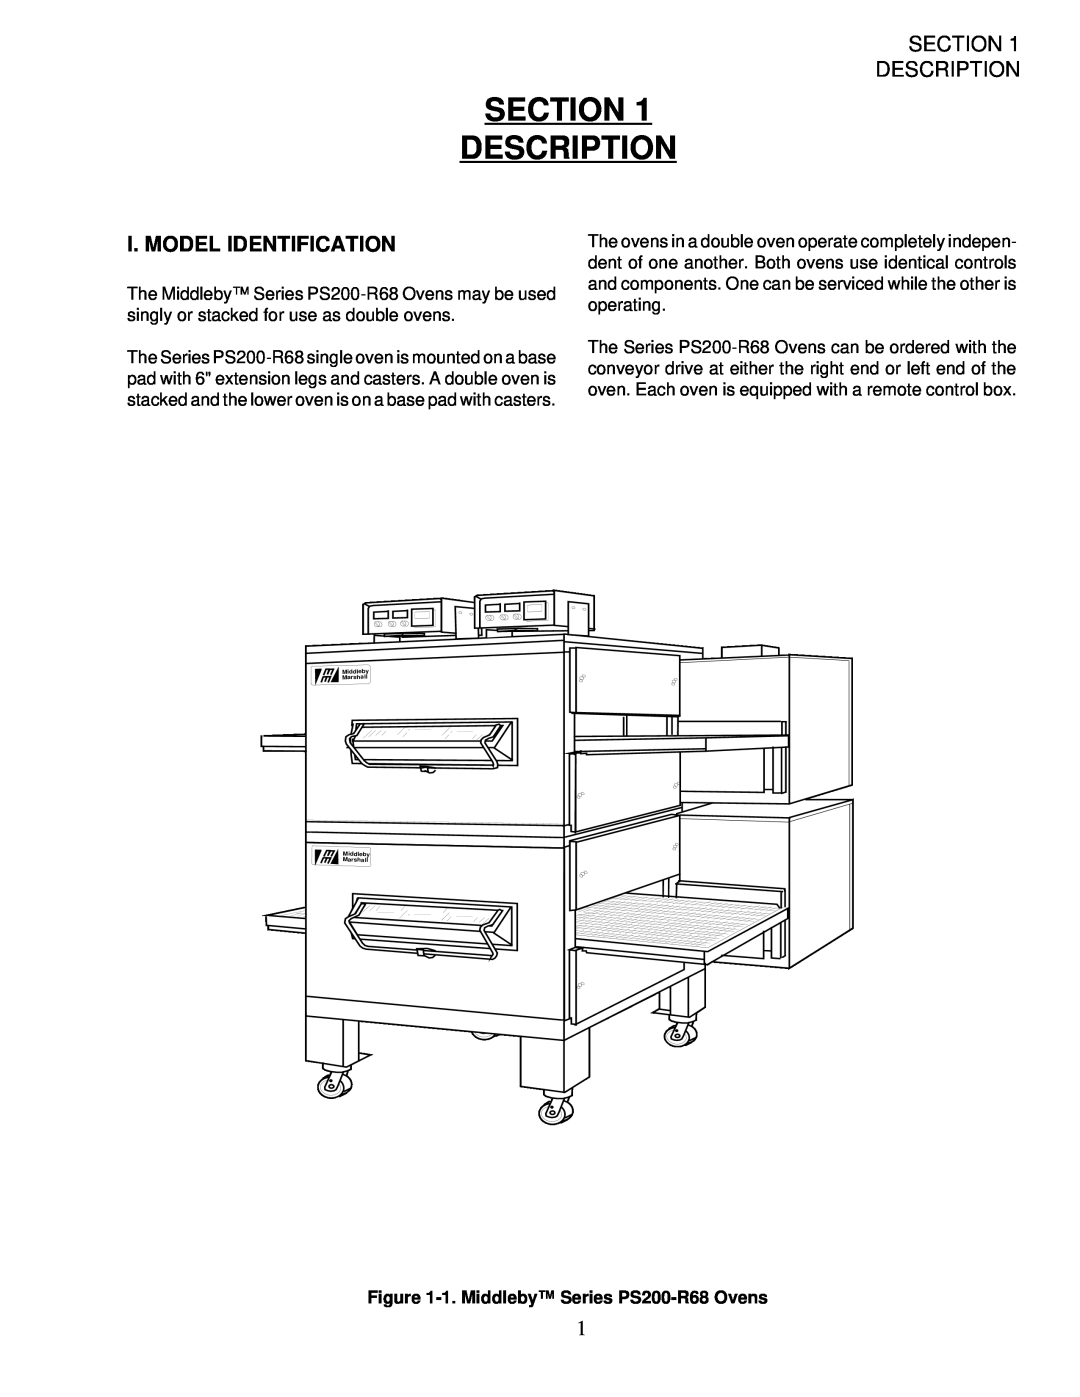 Middleby Marshall installation manual Section Description, I. Model Identification, 1.Middleby Series PS200-R68Ovens 